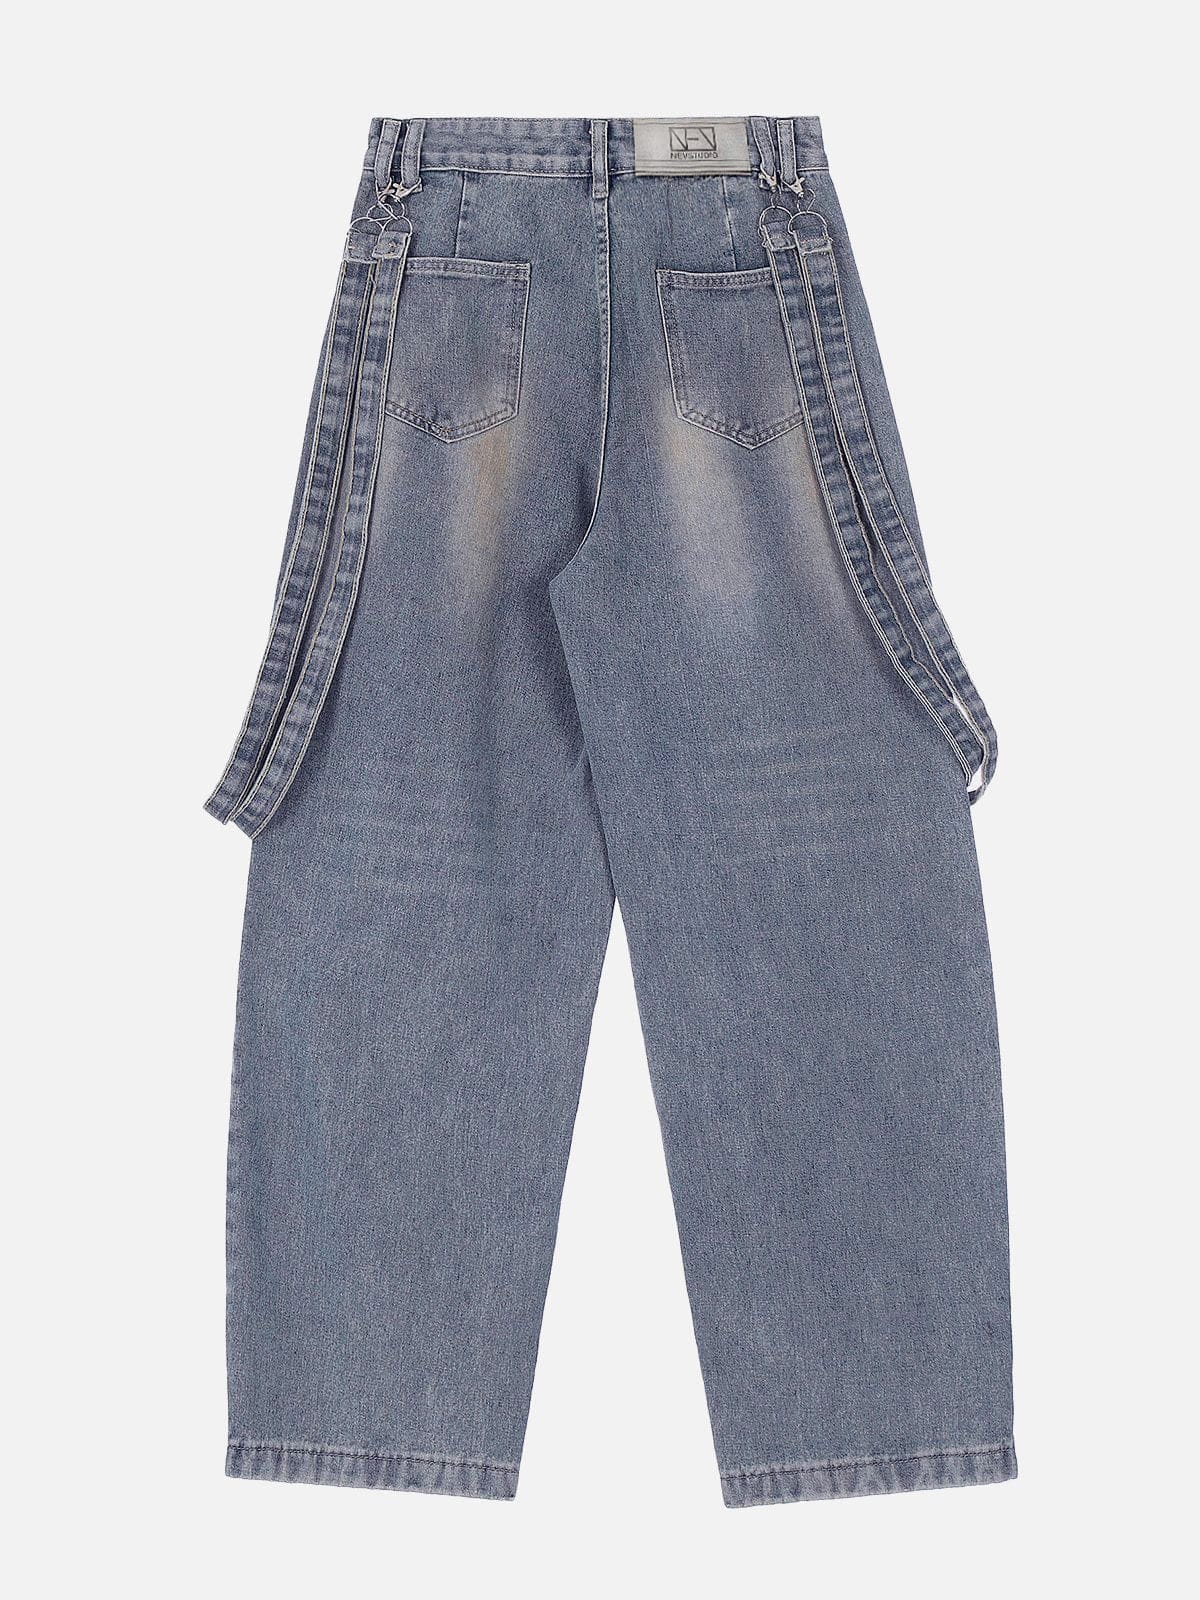 NEV Vintage Solid Double Strap Jeans